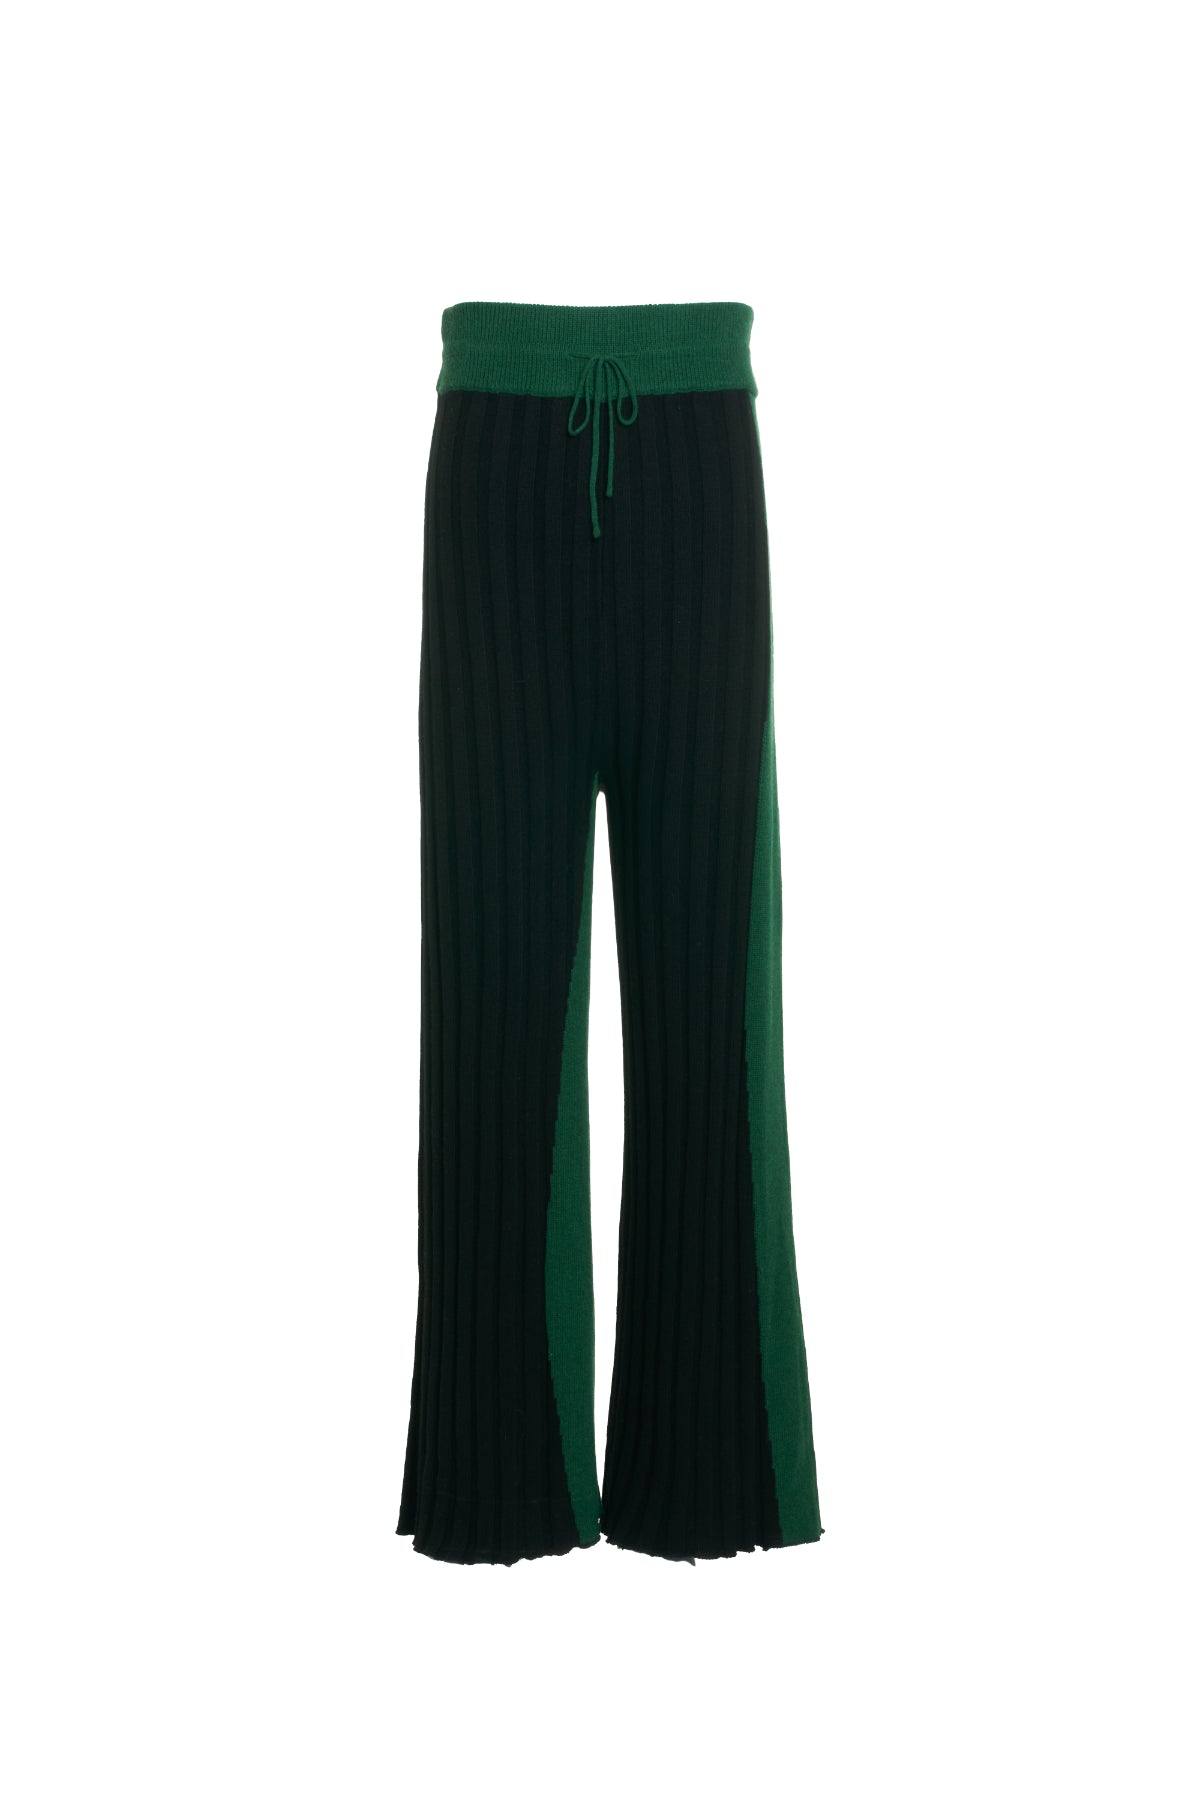 'FOREST' KNIT WIDE LEG CONTRAST TROUSERS